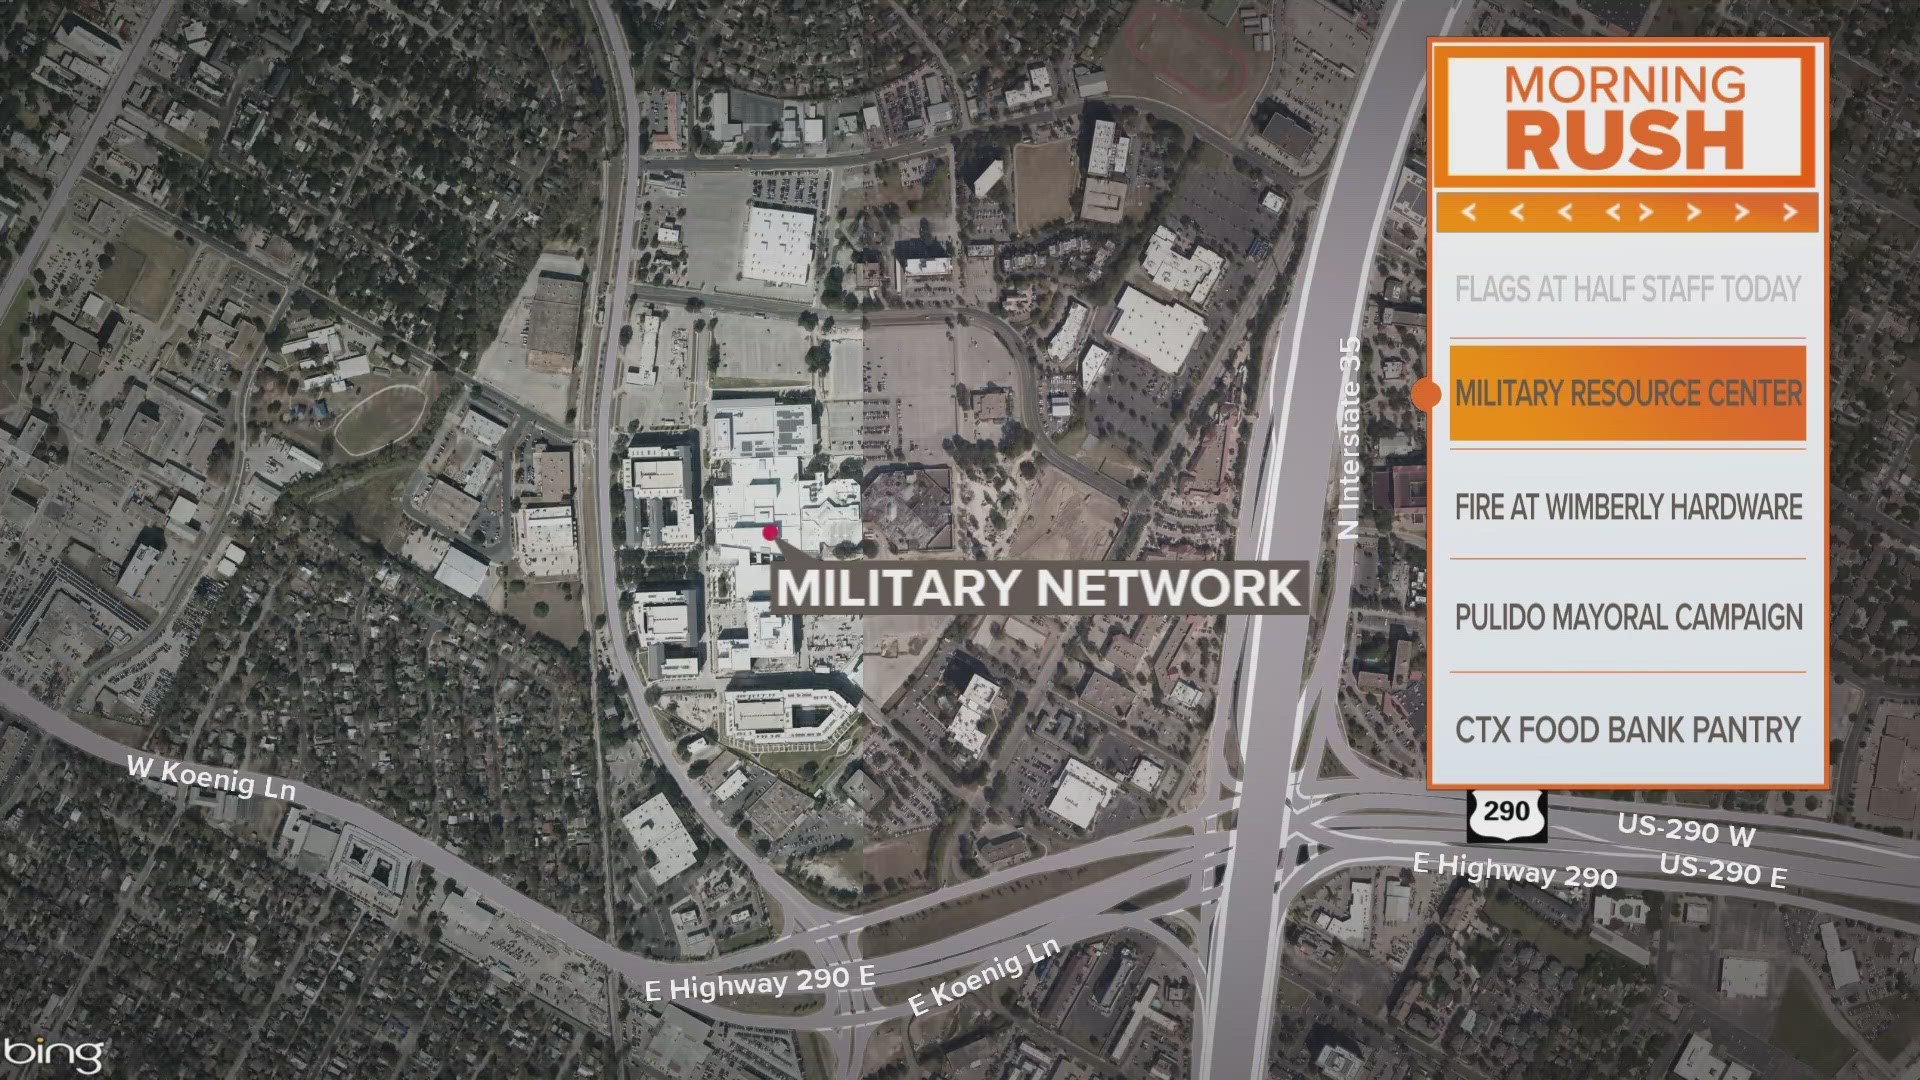 Austin Community College will unveil its new military network at its Highland campus.